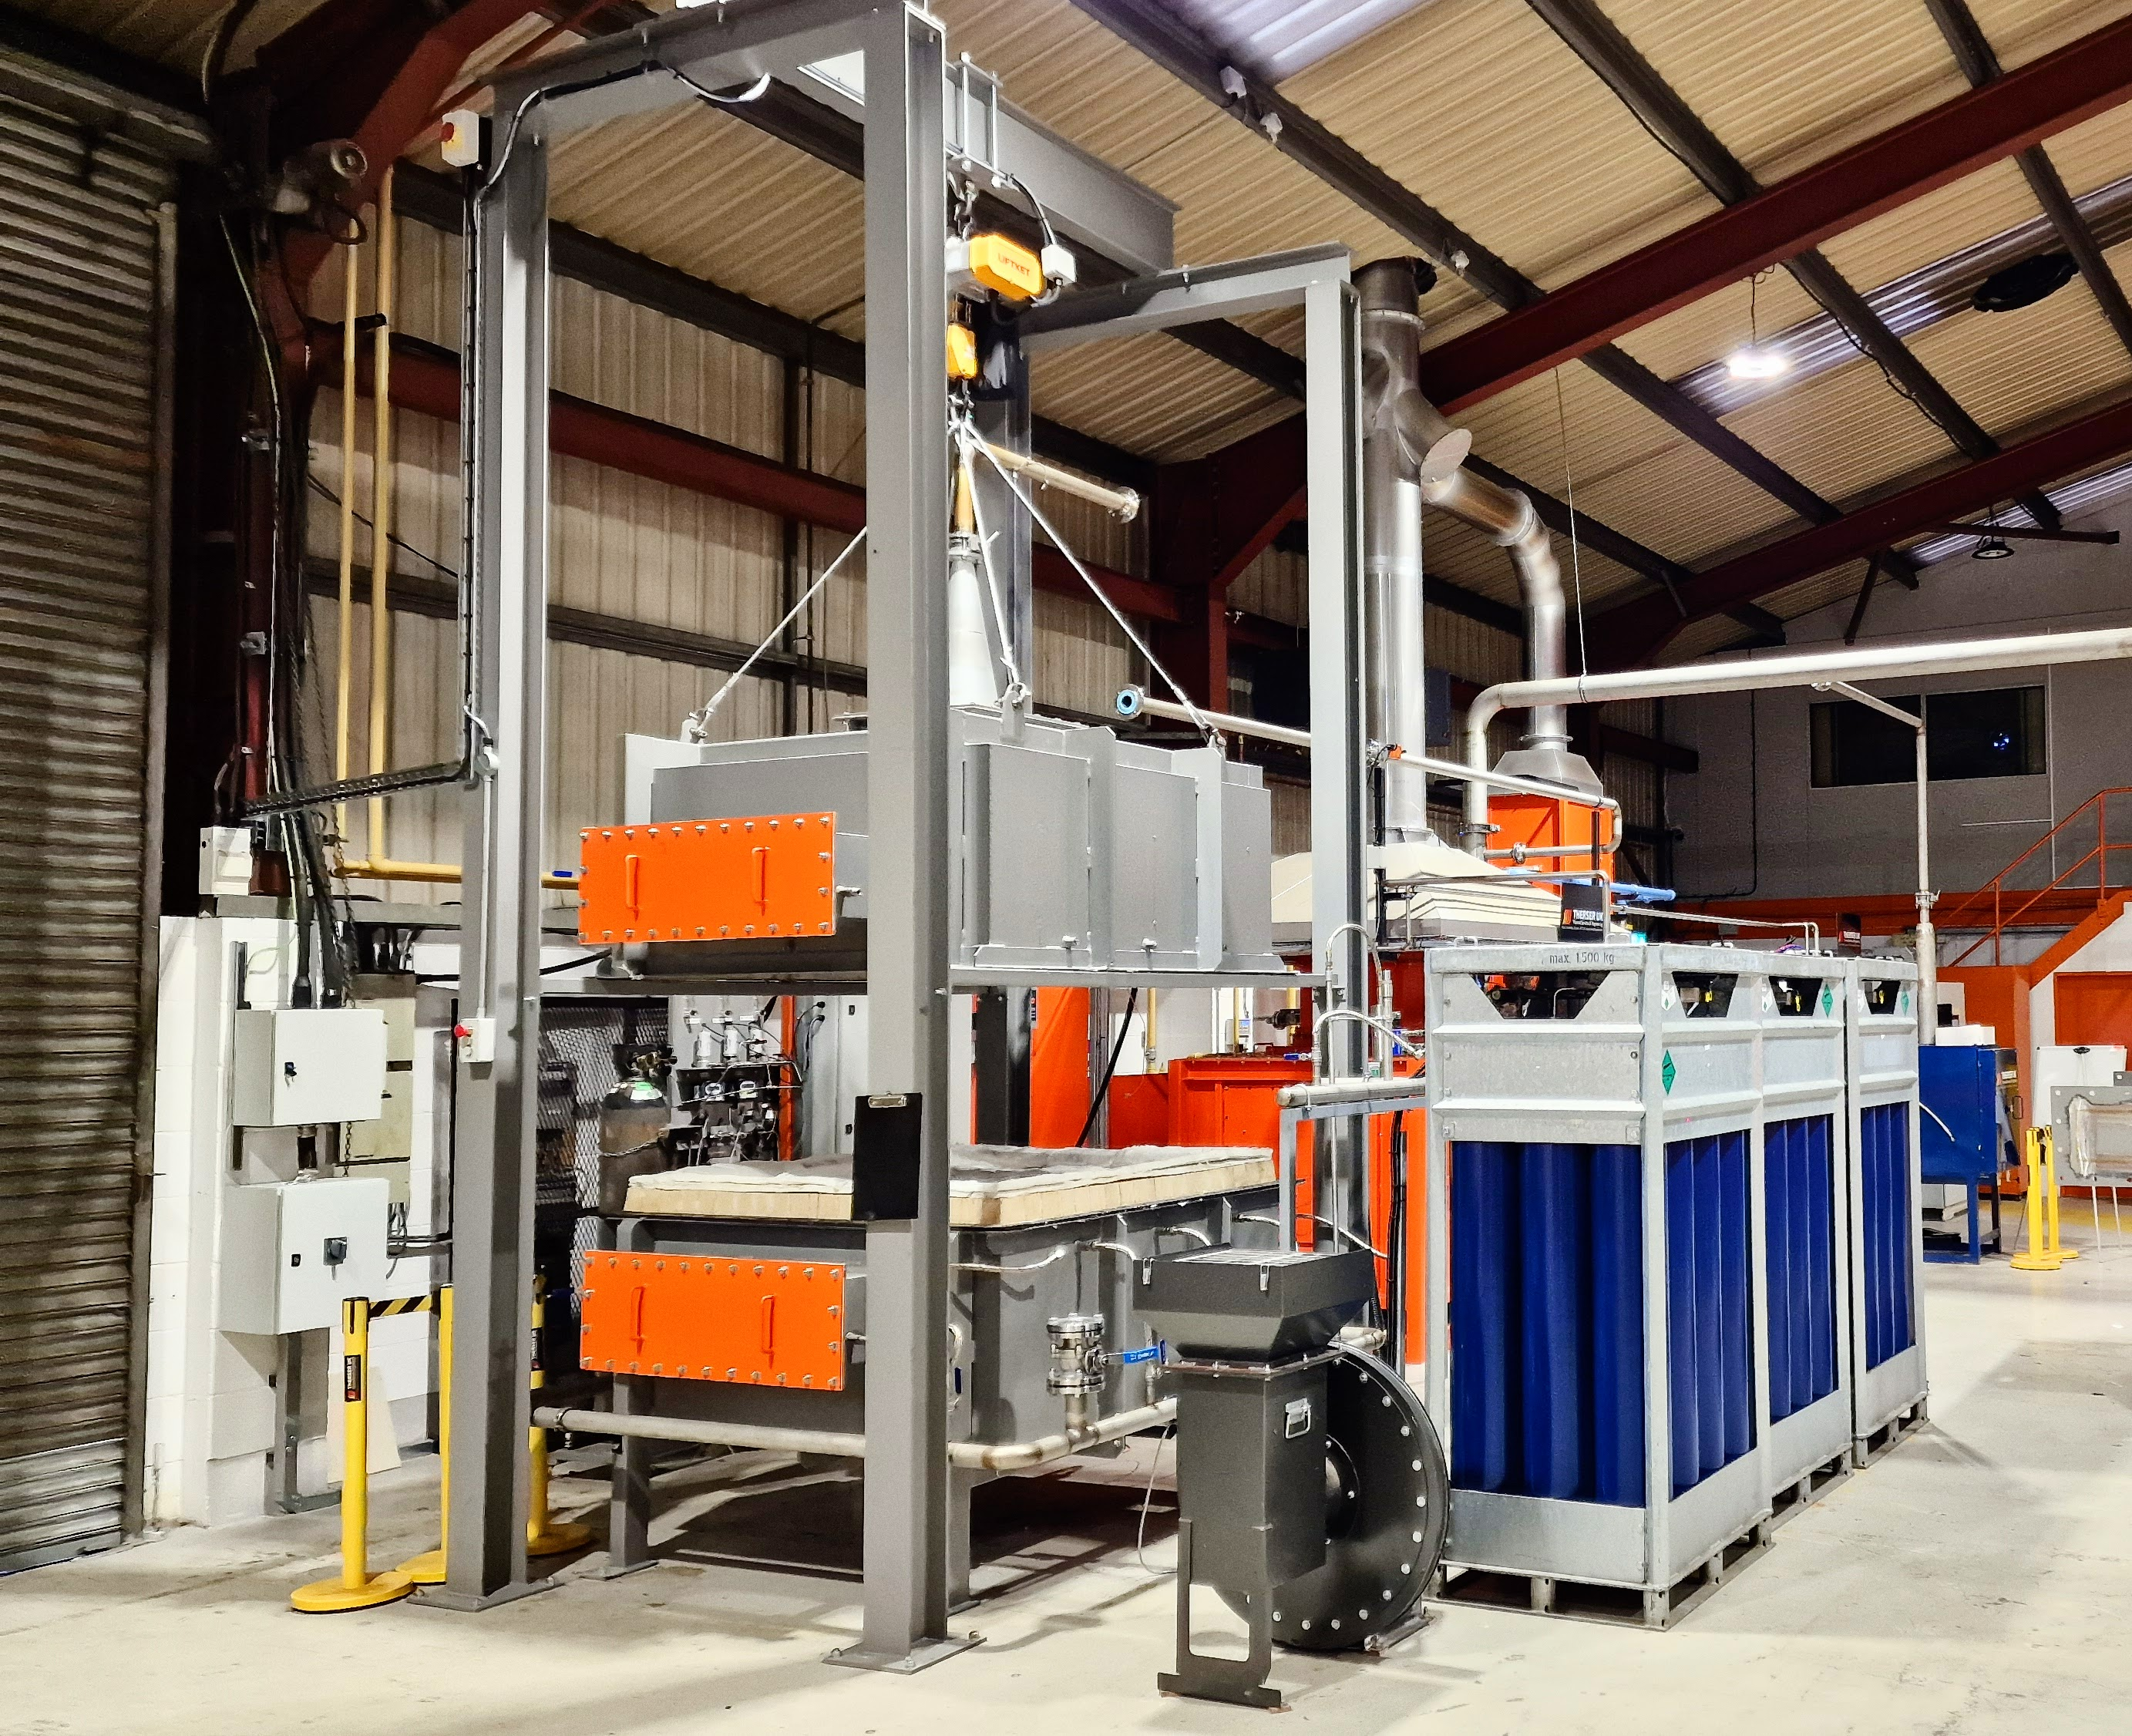 THERSER UK Completes Another Test Trial Under Nitrogen Atmosphere